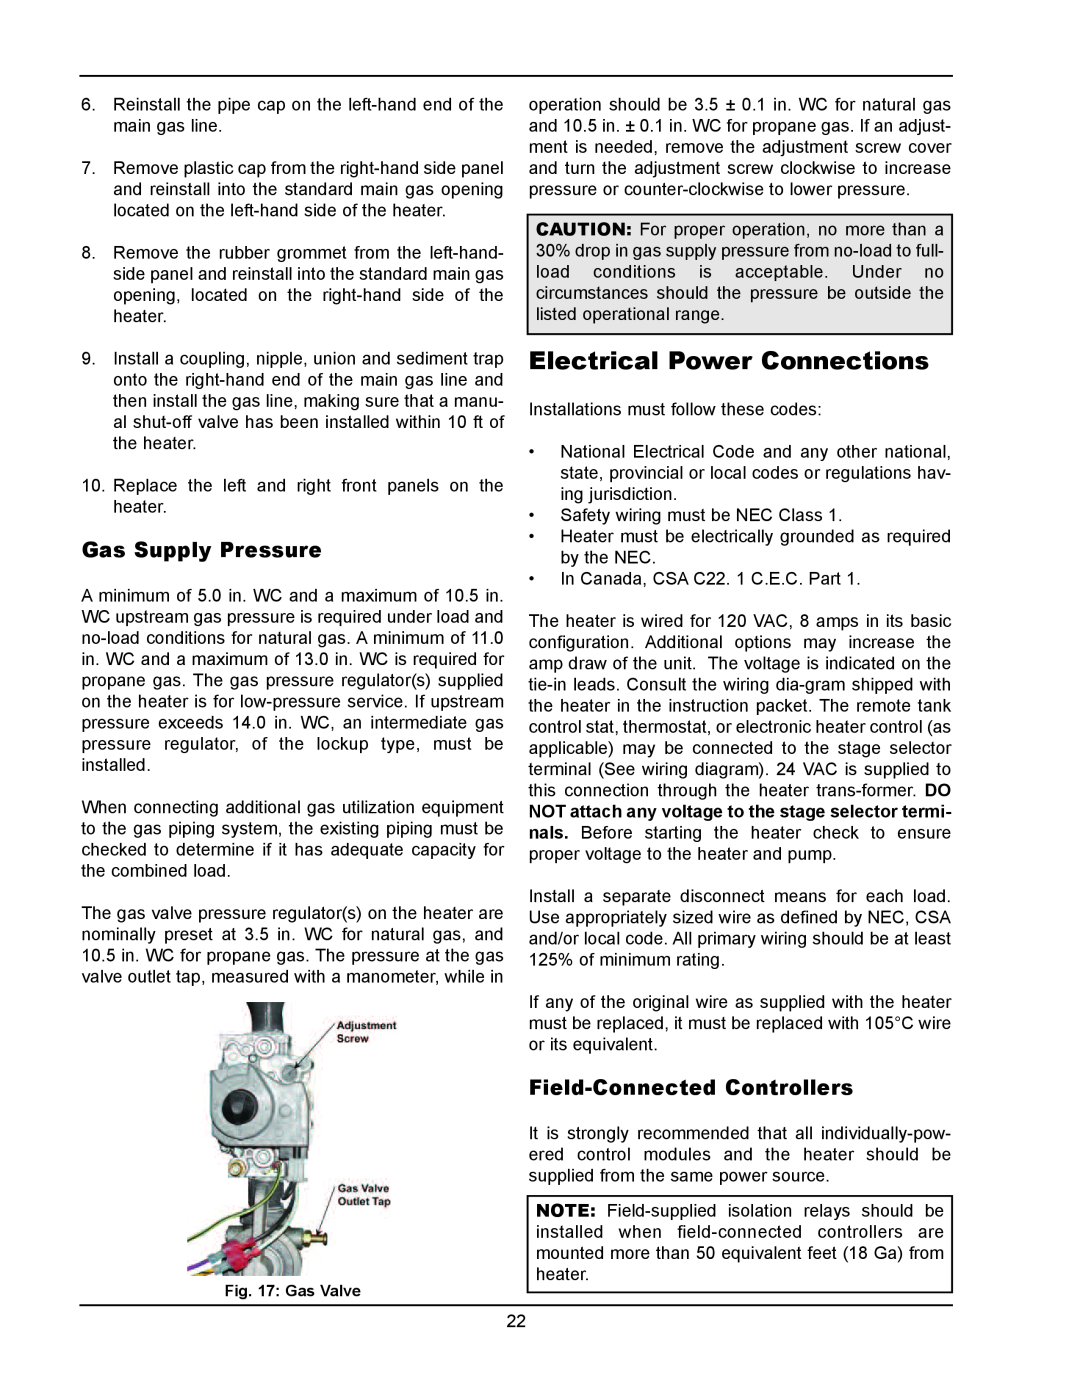 Raypak 902B, 302B manual Electrical Power Connections, Gas Supply Pressure, Field-ConnectedControllers 